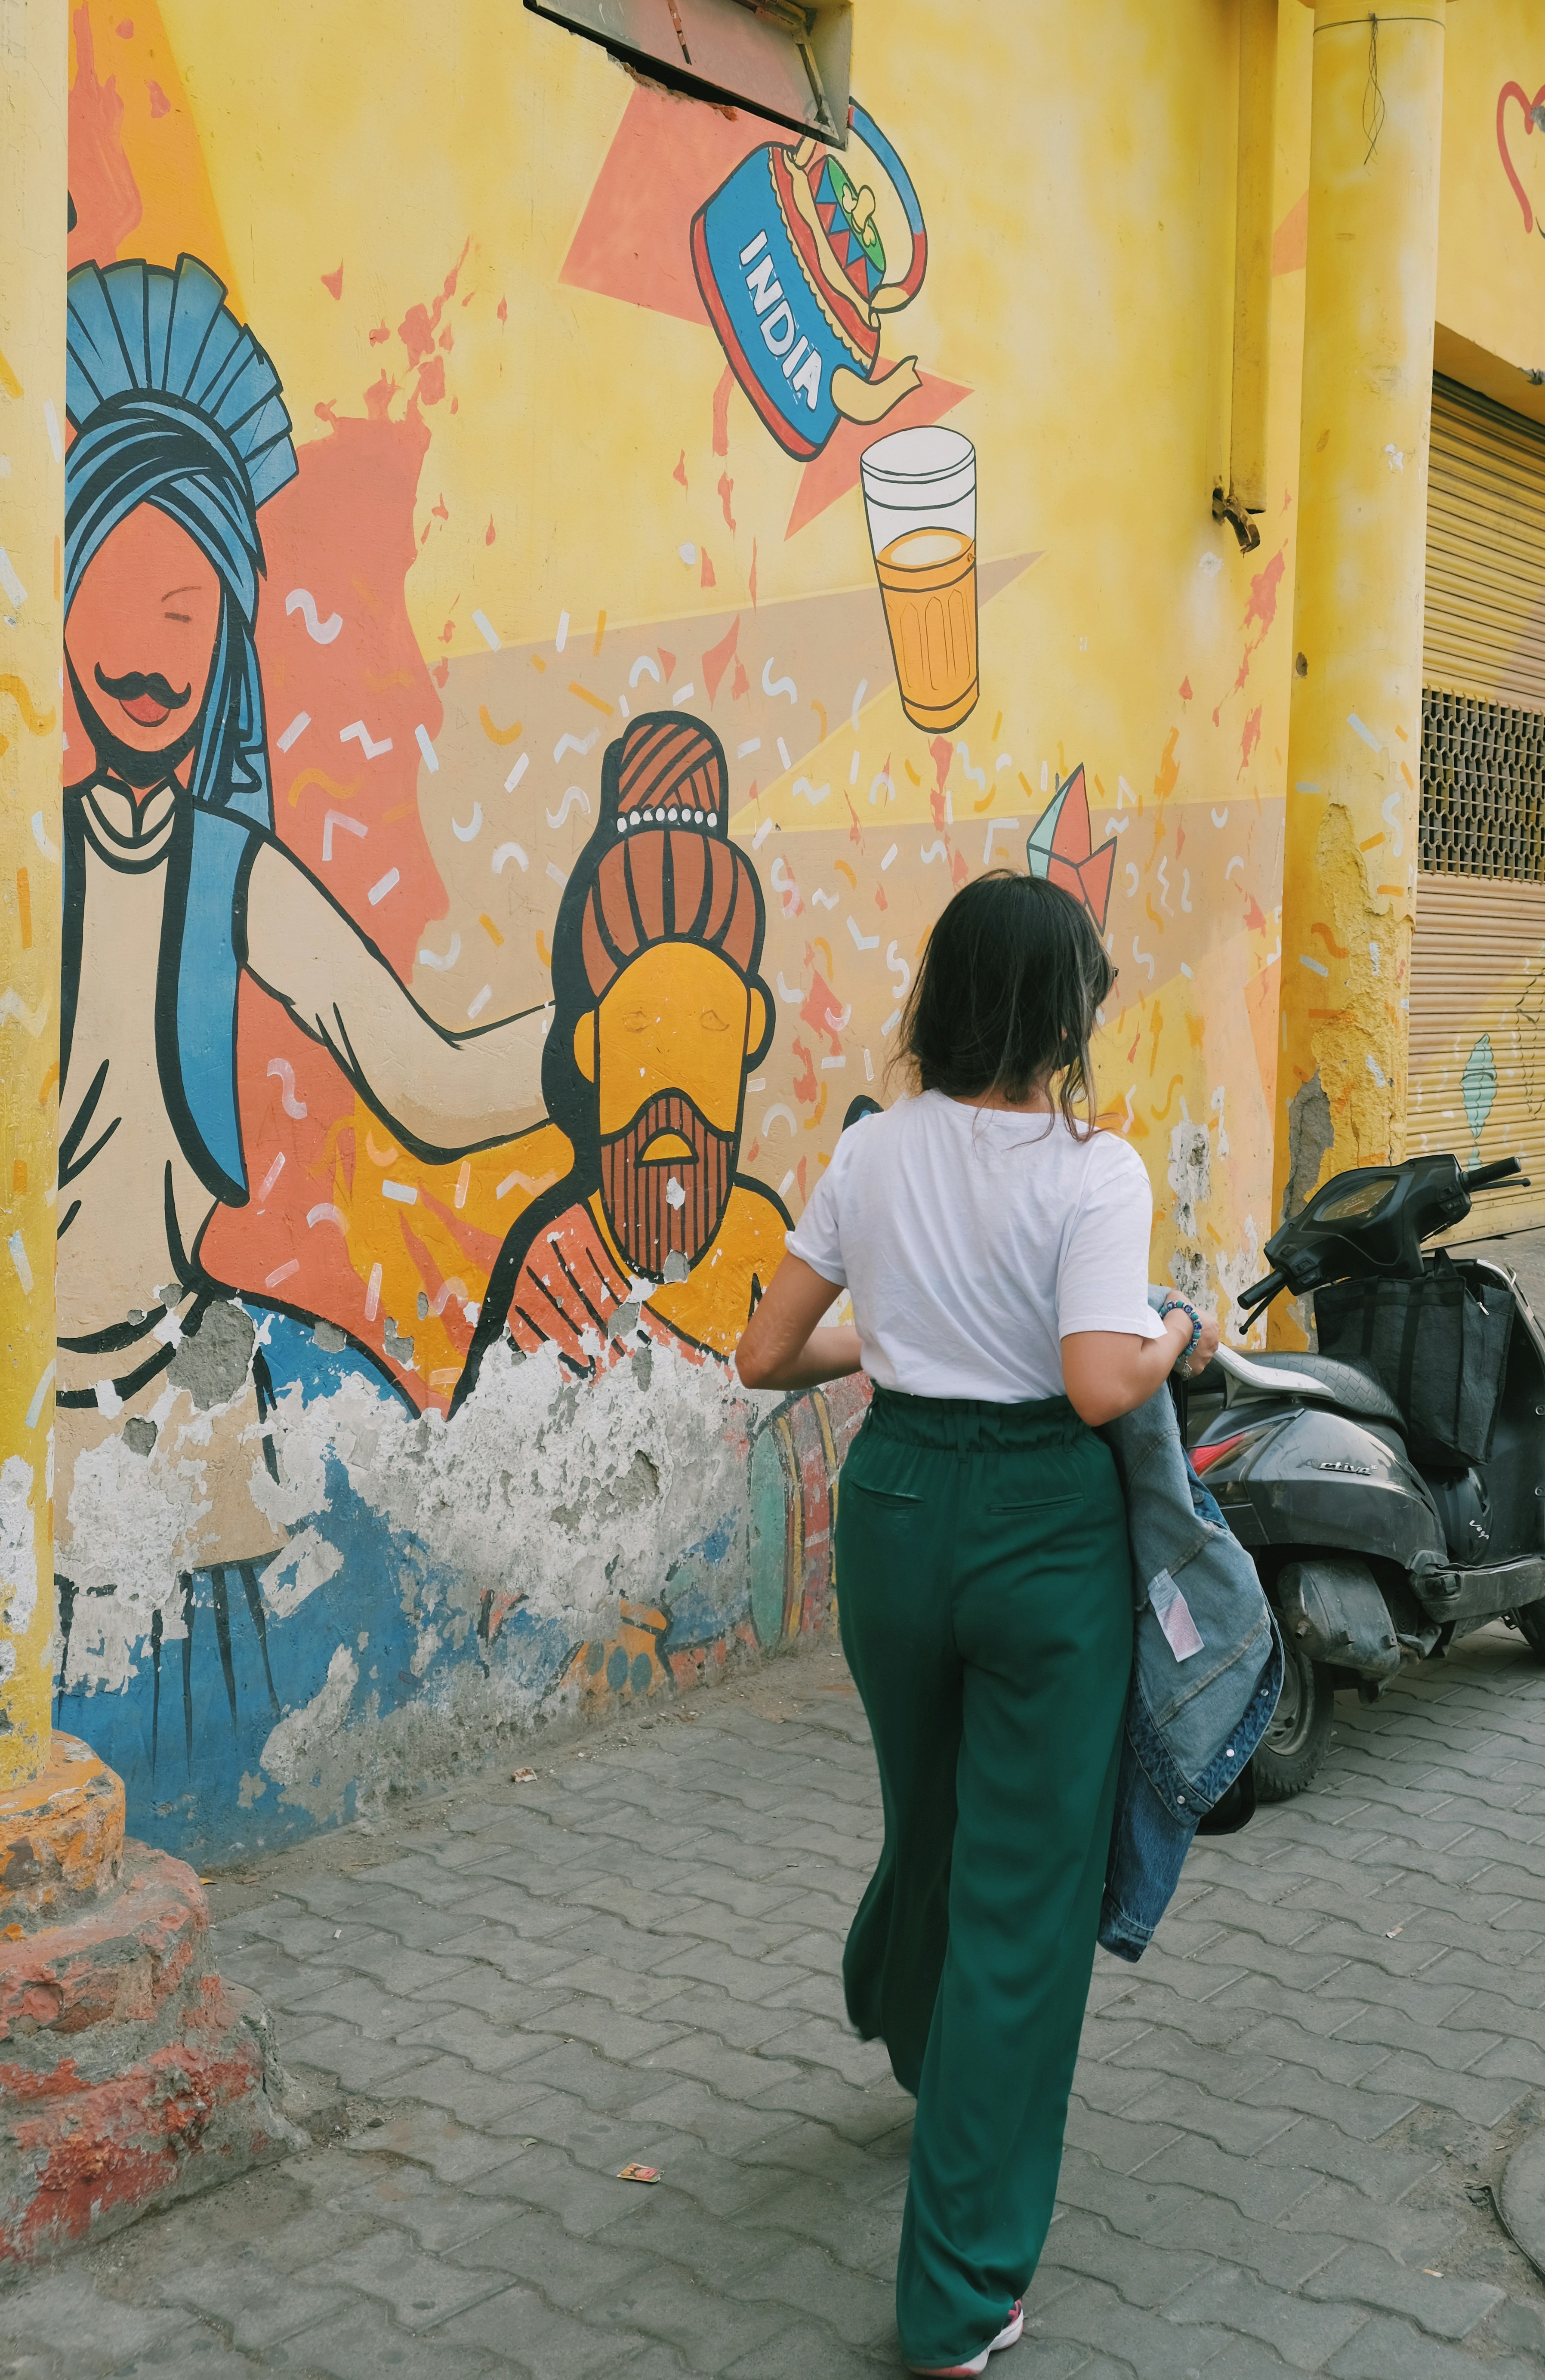 woman in white t-shirt and green pants standing beside graffiti wall during daytime